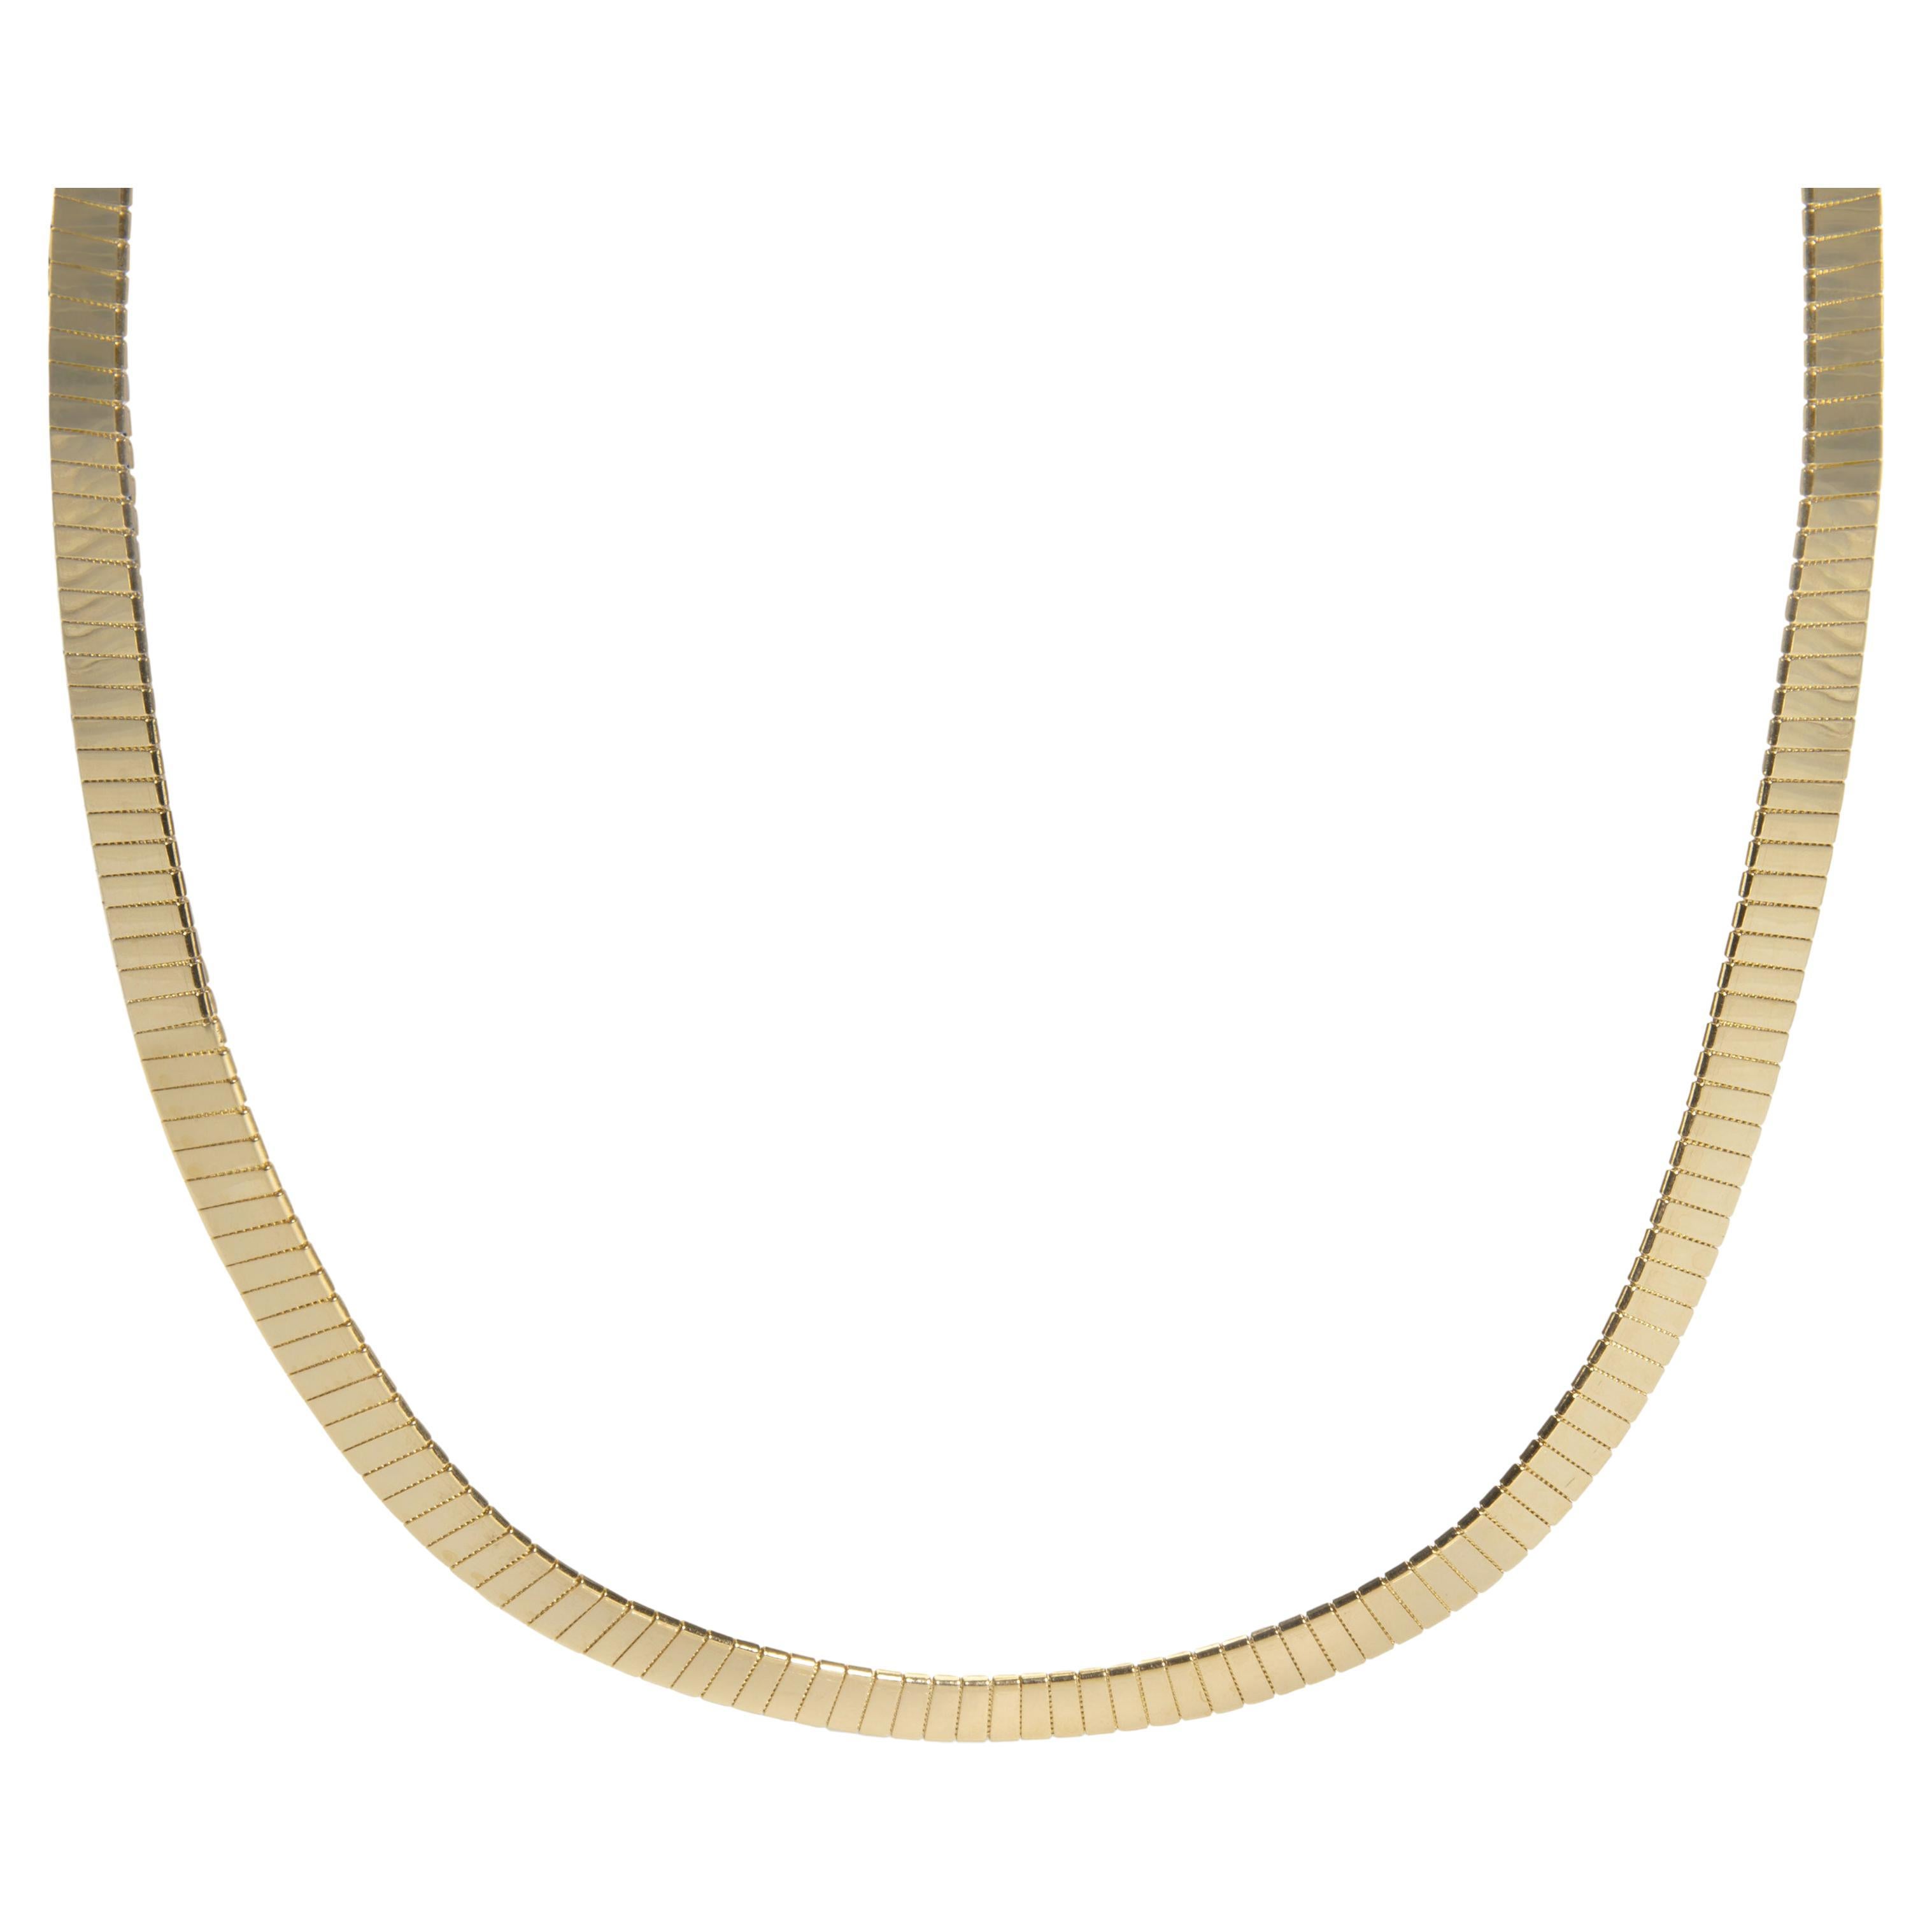 Collar Necklace in 14K Yellow Gold